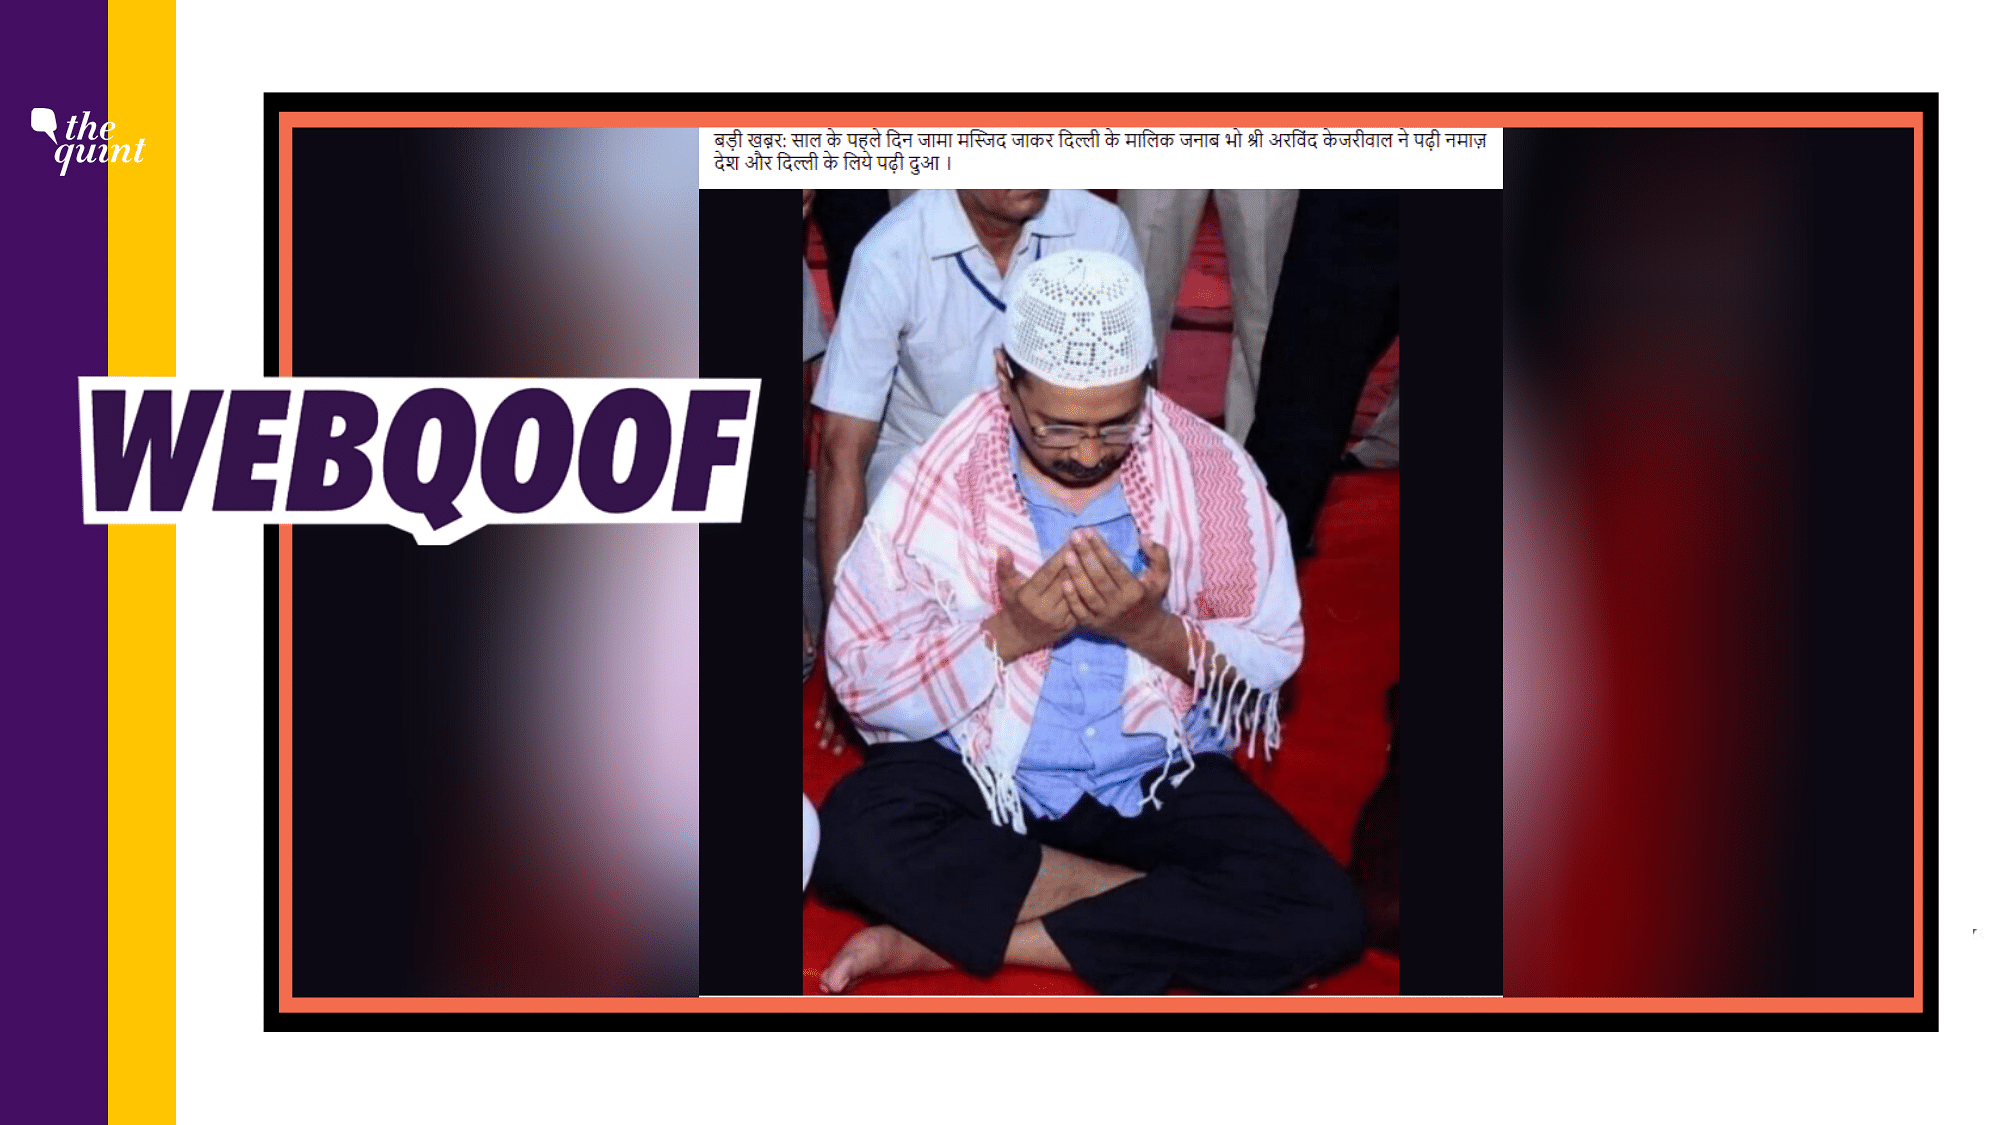 The image could be traced back to July 2016 when Kejriwal had offered prayers during the month of Ramzan in Punjab’s Malerkotla, Sangrur.